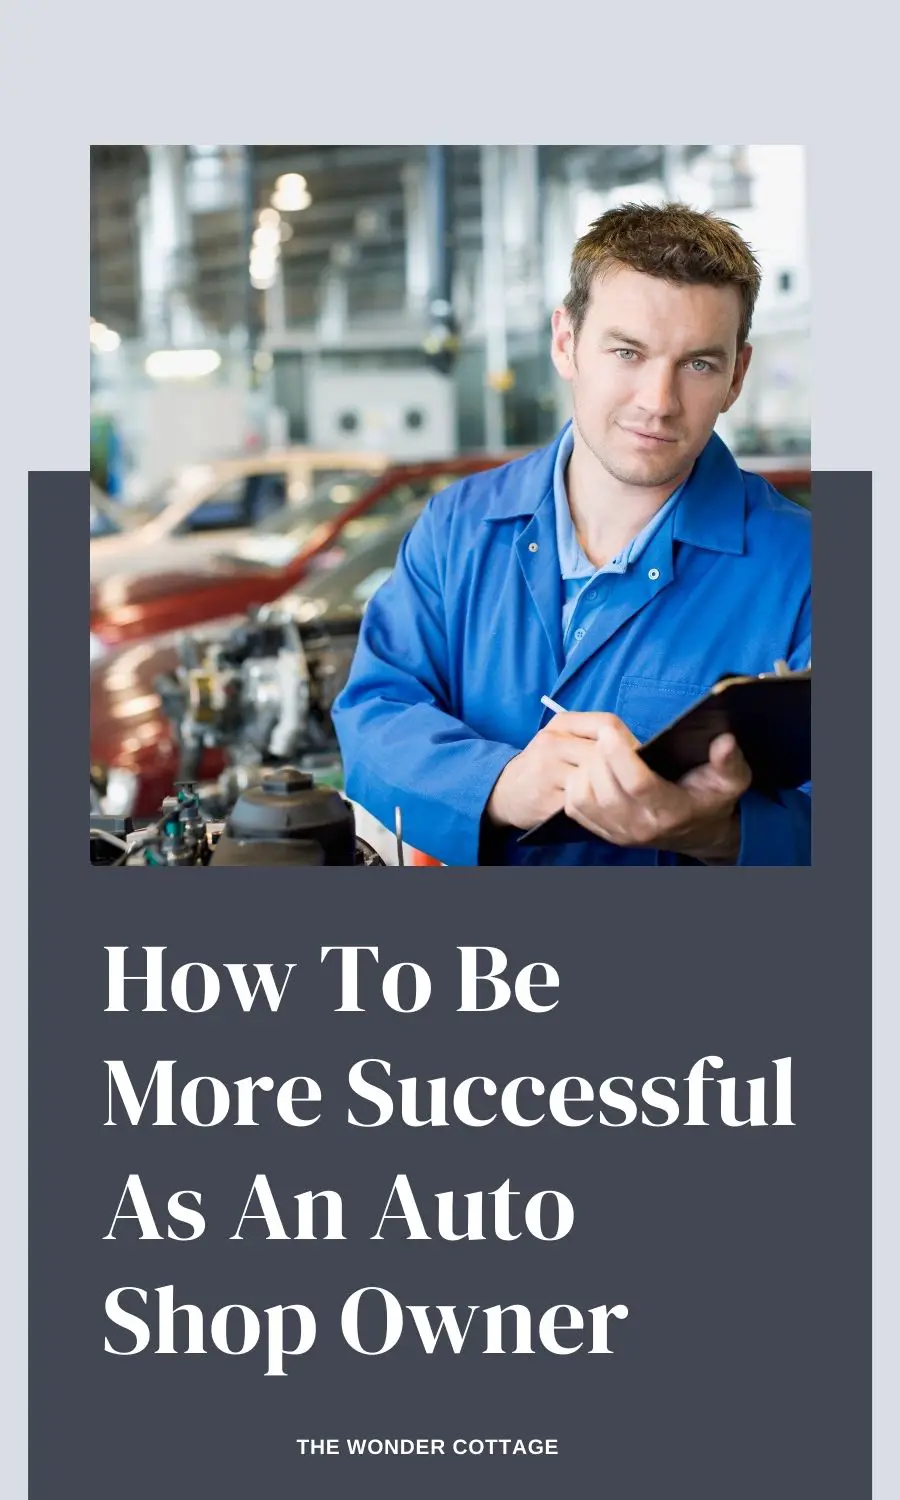 How To Be More Successful As An Auto Shop Owner